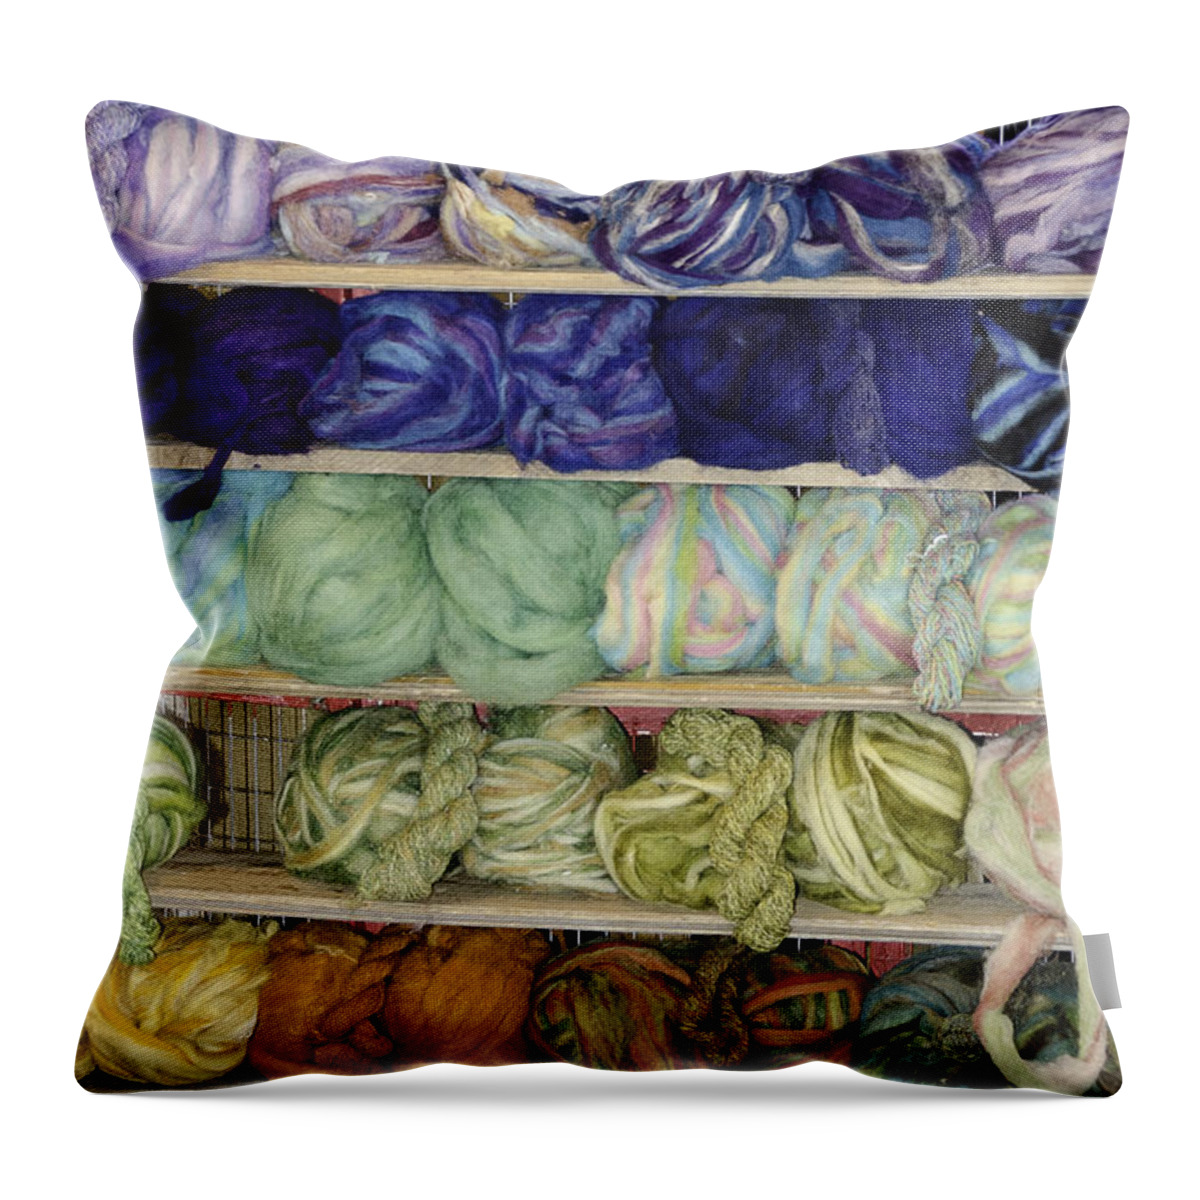 Dyed Throw Pillow featuring the photograph Dyed Balls of wool #1 by LeeAnn McLaneGoetz McLaneGoetzStudioLLCcom